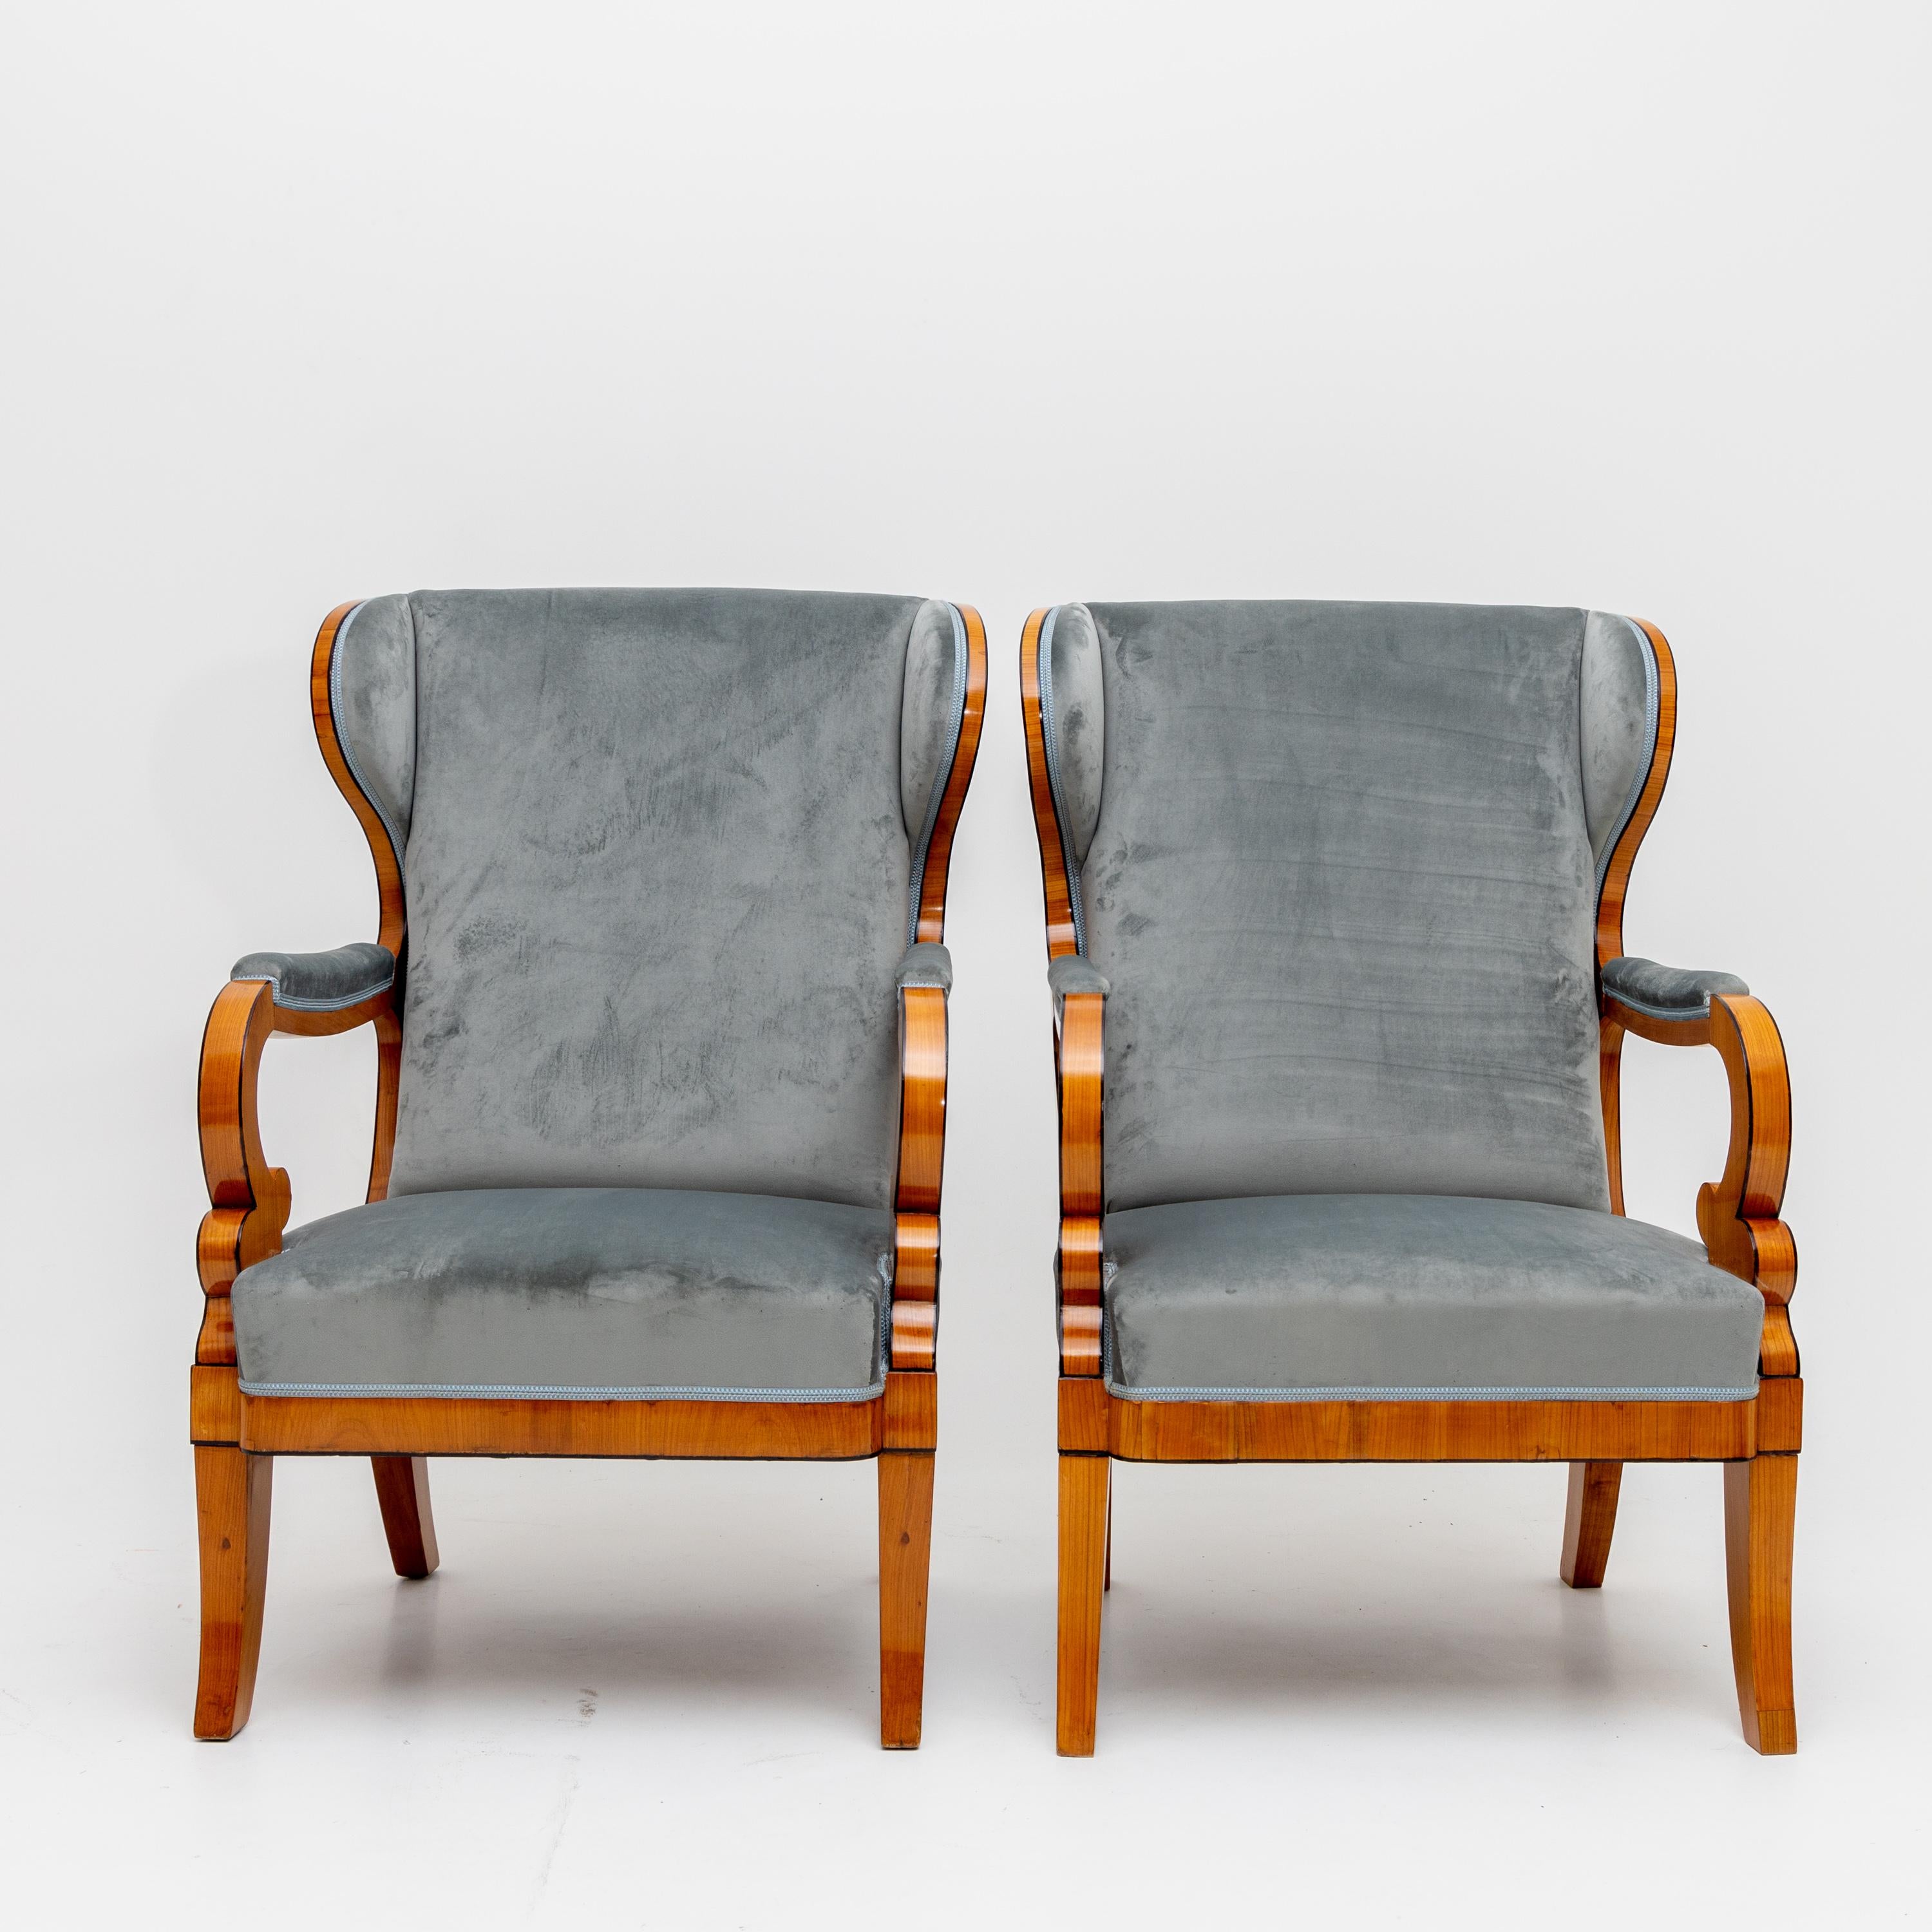 Textile Pair of Wingback Chairs, c. 1830